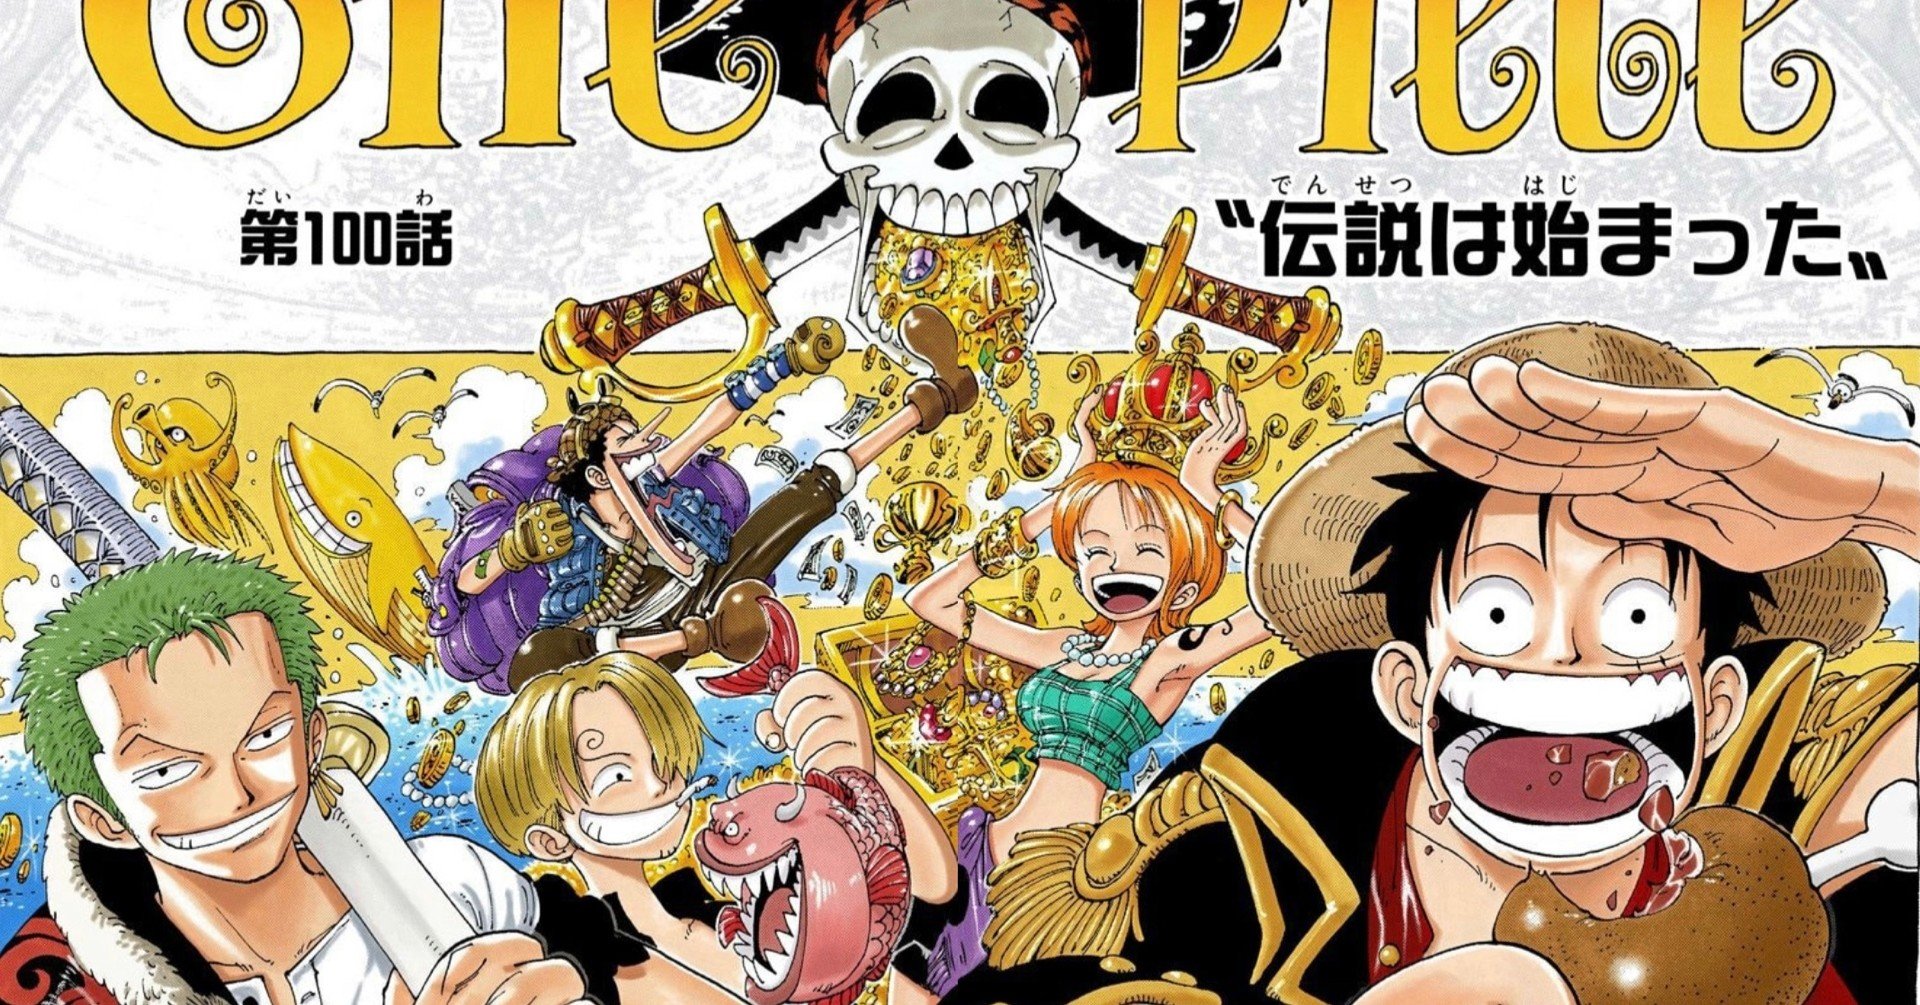 One Piece 考察 記念すべき第1000話の内容を考える 山野 礁太 ライター One Piece学 研究家 Note